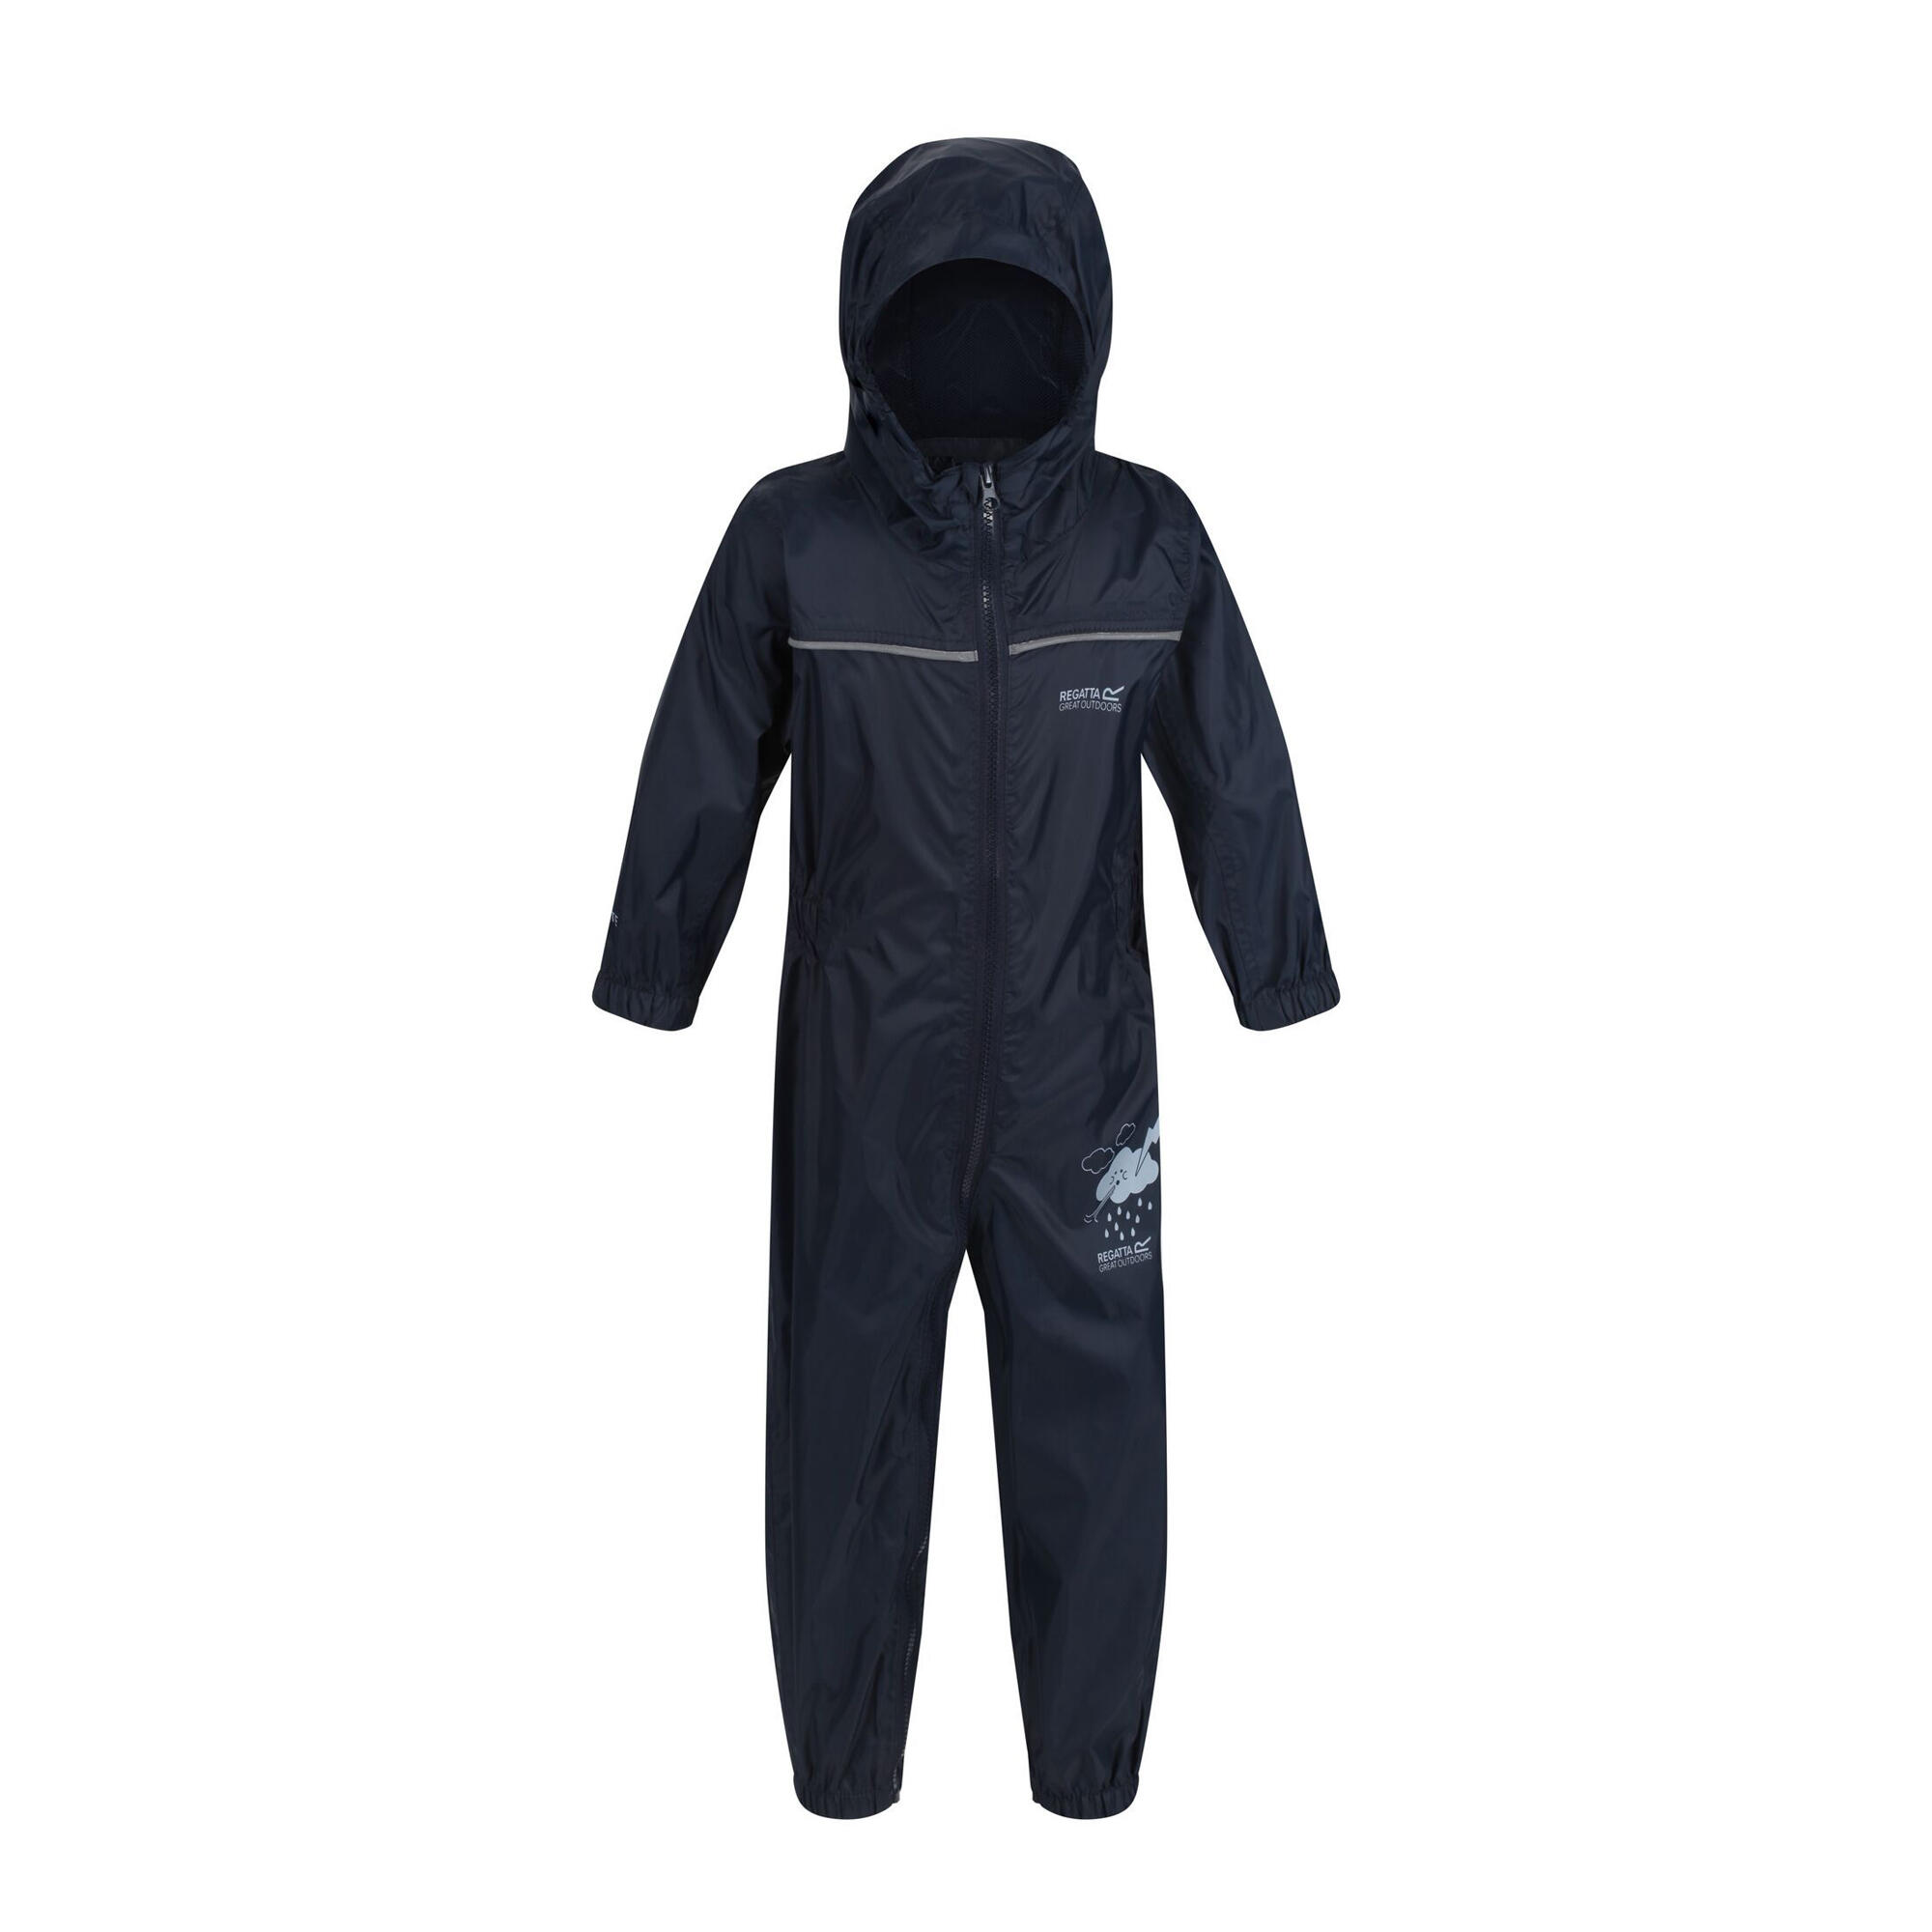 Great Outdoors Childrens Toddlers Puddle IV Waterproof Rainsuit (Navy) 1/5